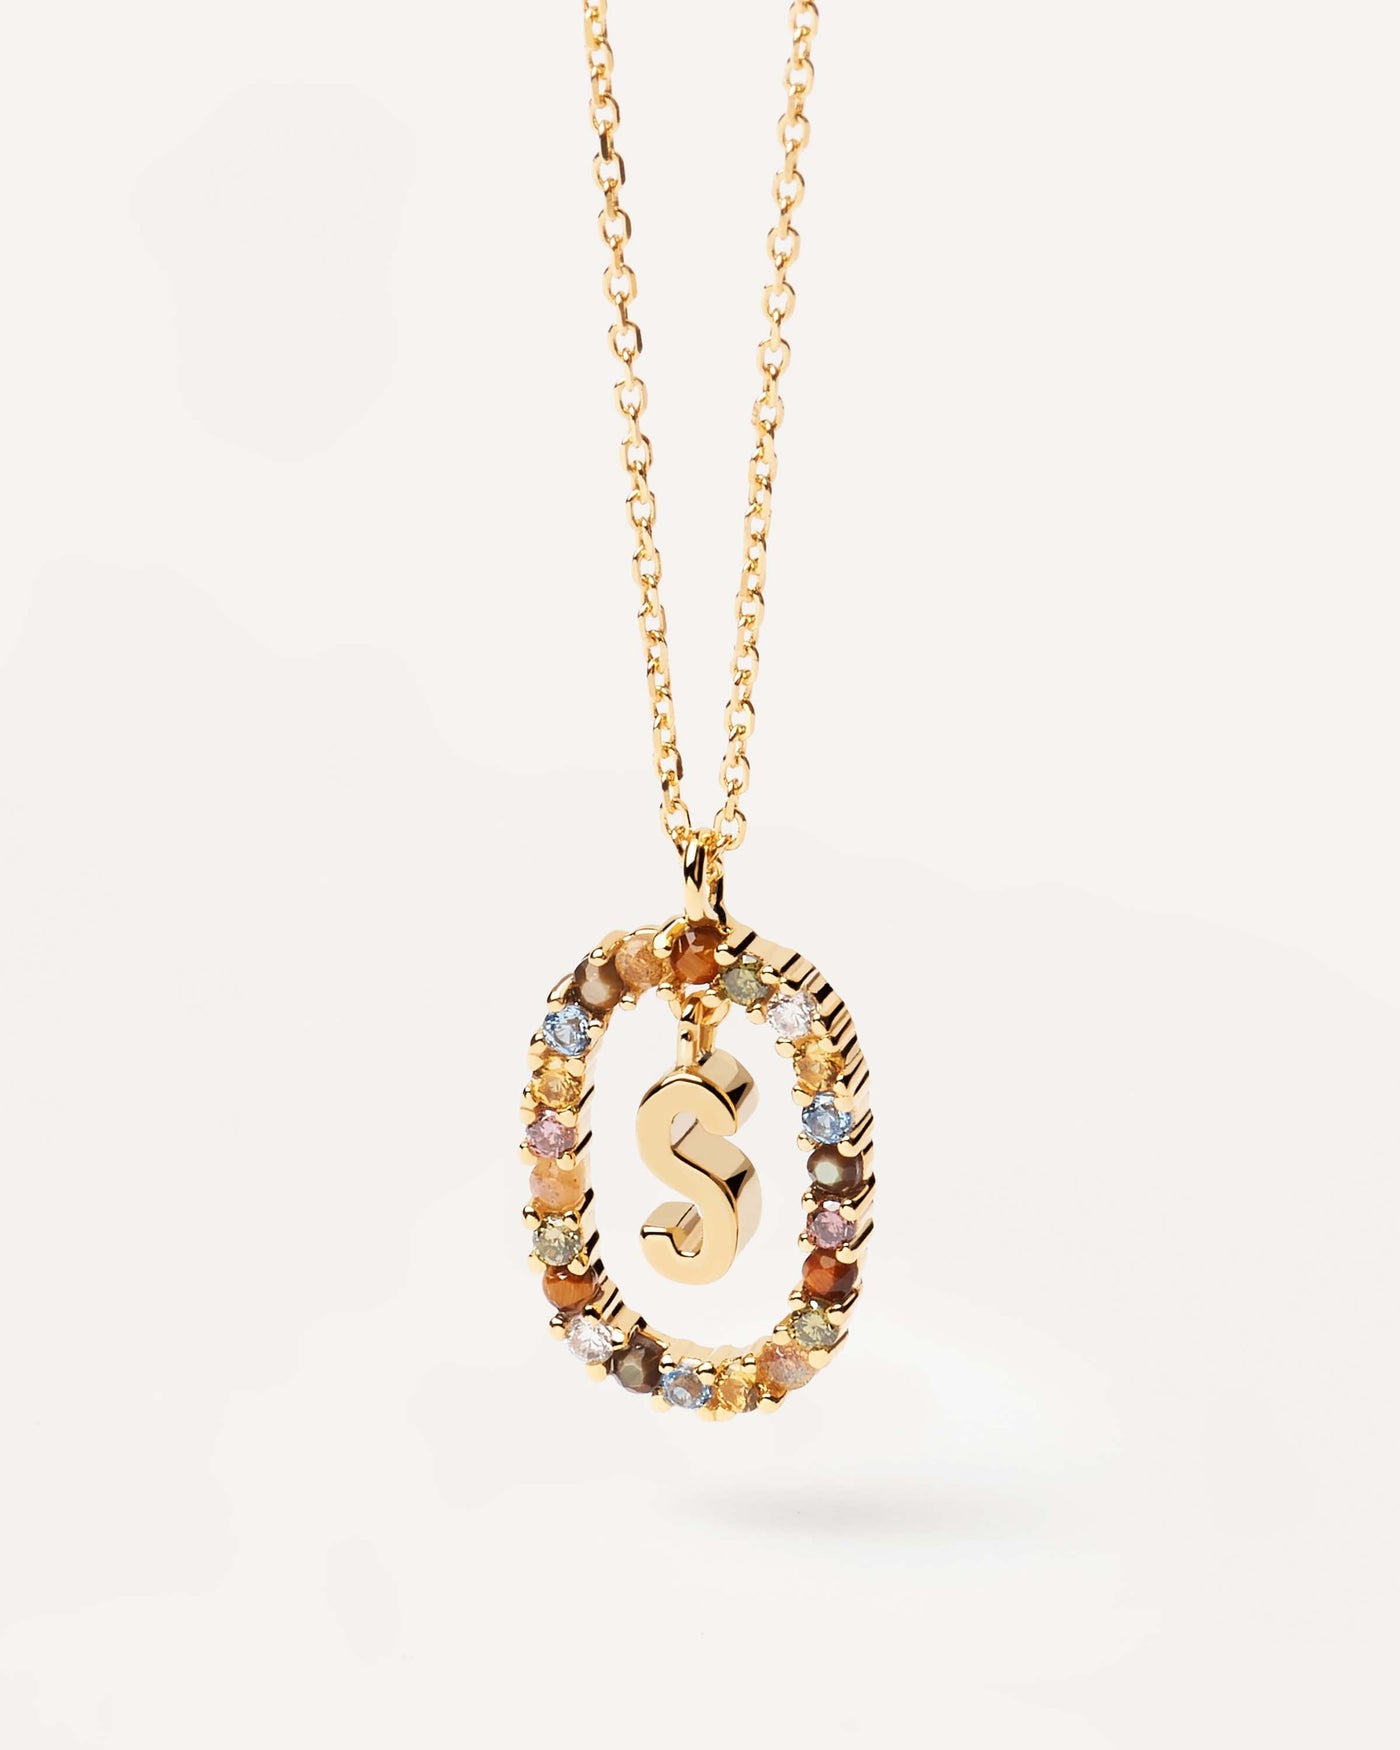 2023 Selection | Letter S necklace. Initial S necklace in gold-plated silver, circled by colorful gemstones. Get the latest arrival from PDPAOLA. Place your order safely and get this Best Seller. Free Shipping.